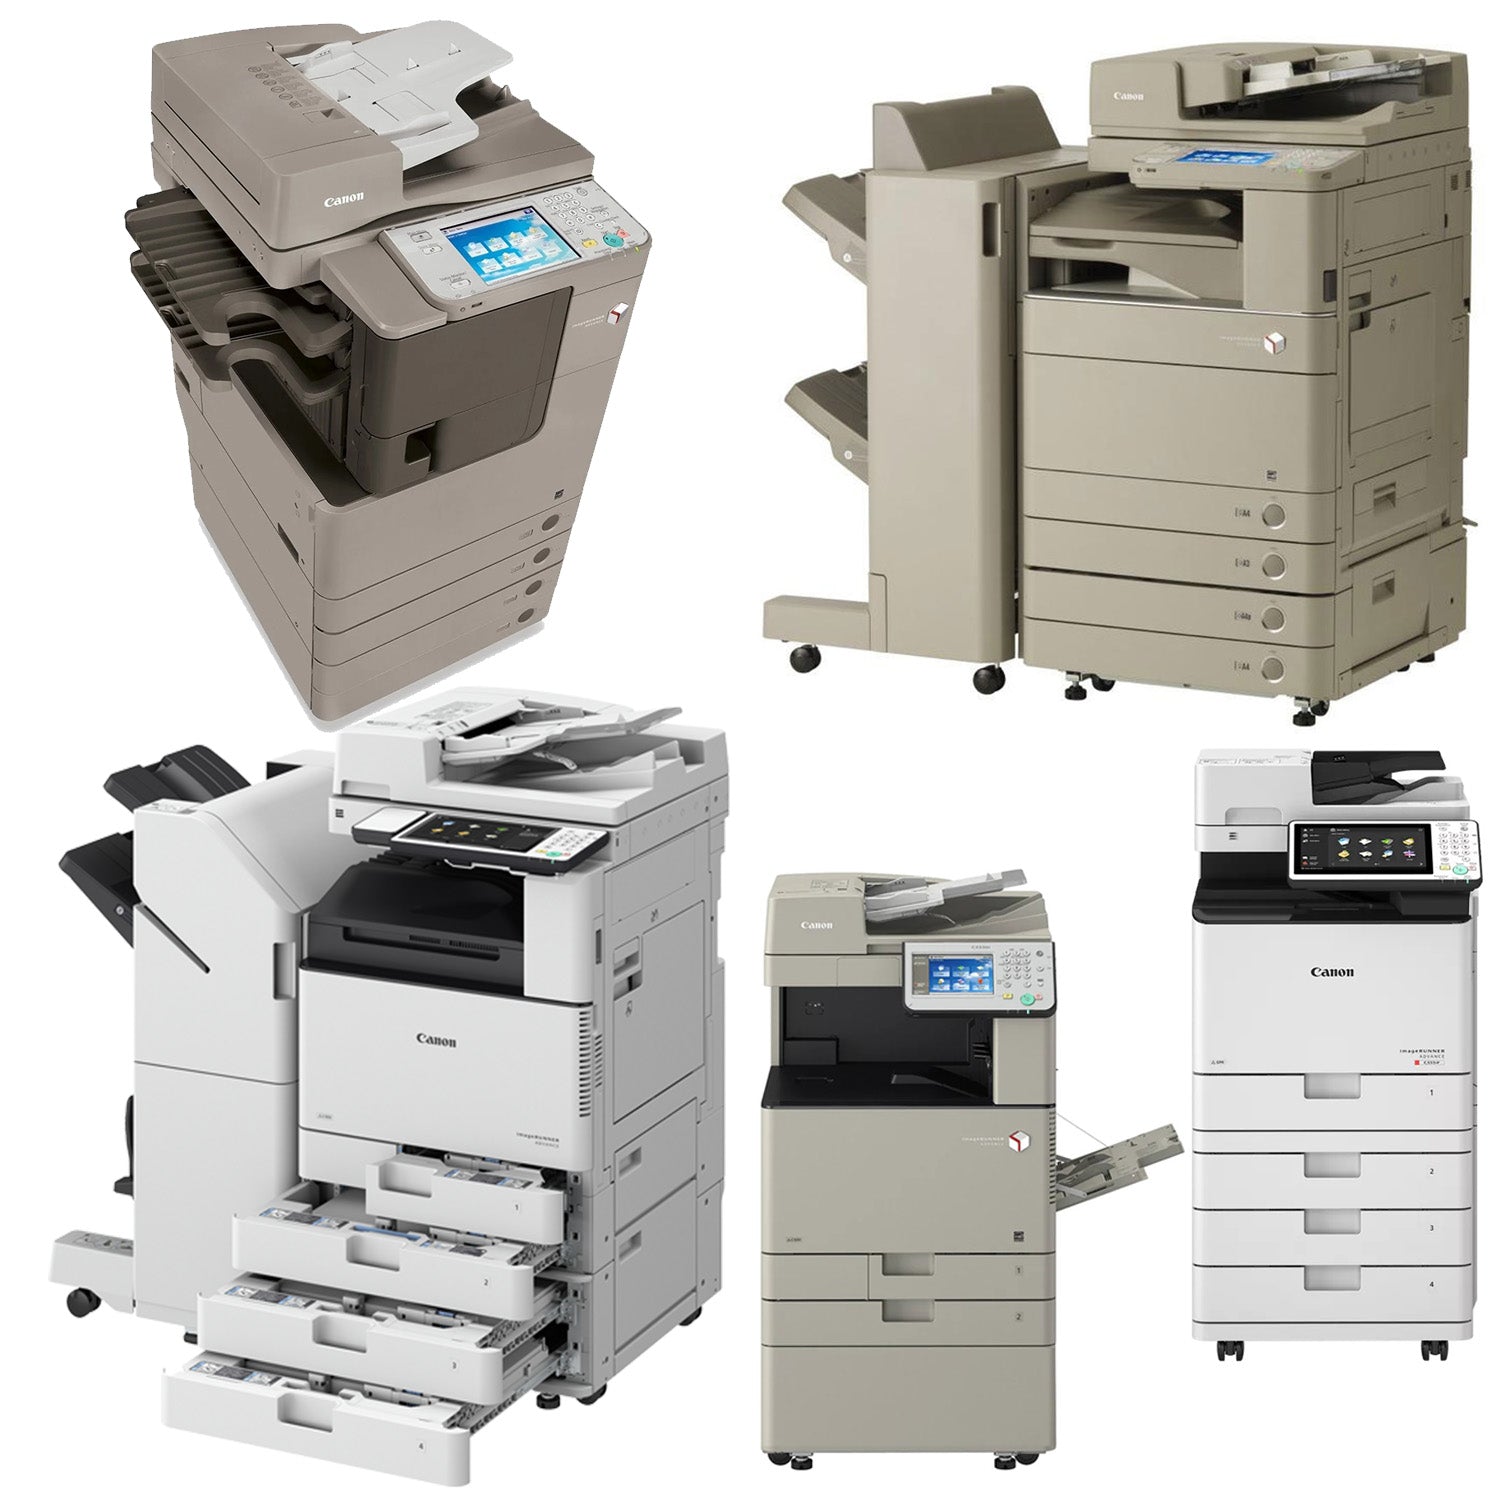 The Top 5 Canon Copiers for Business